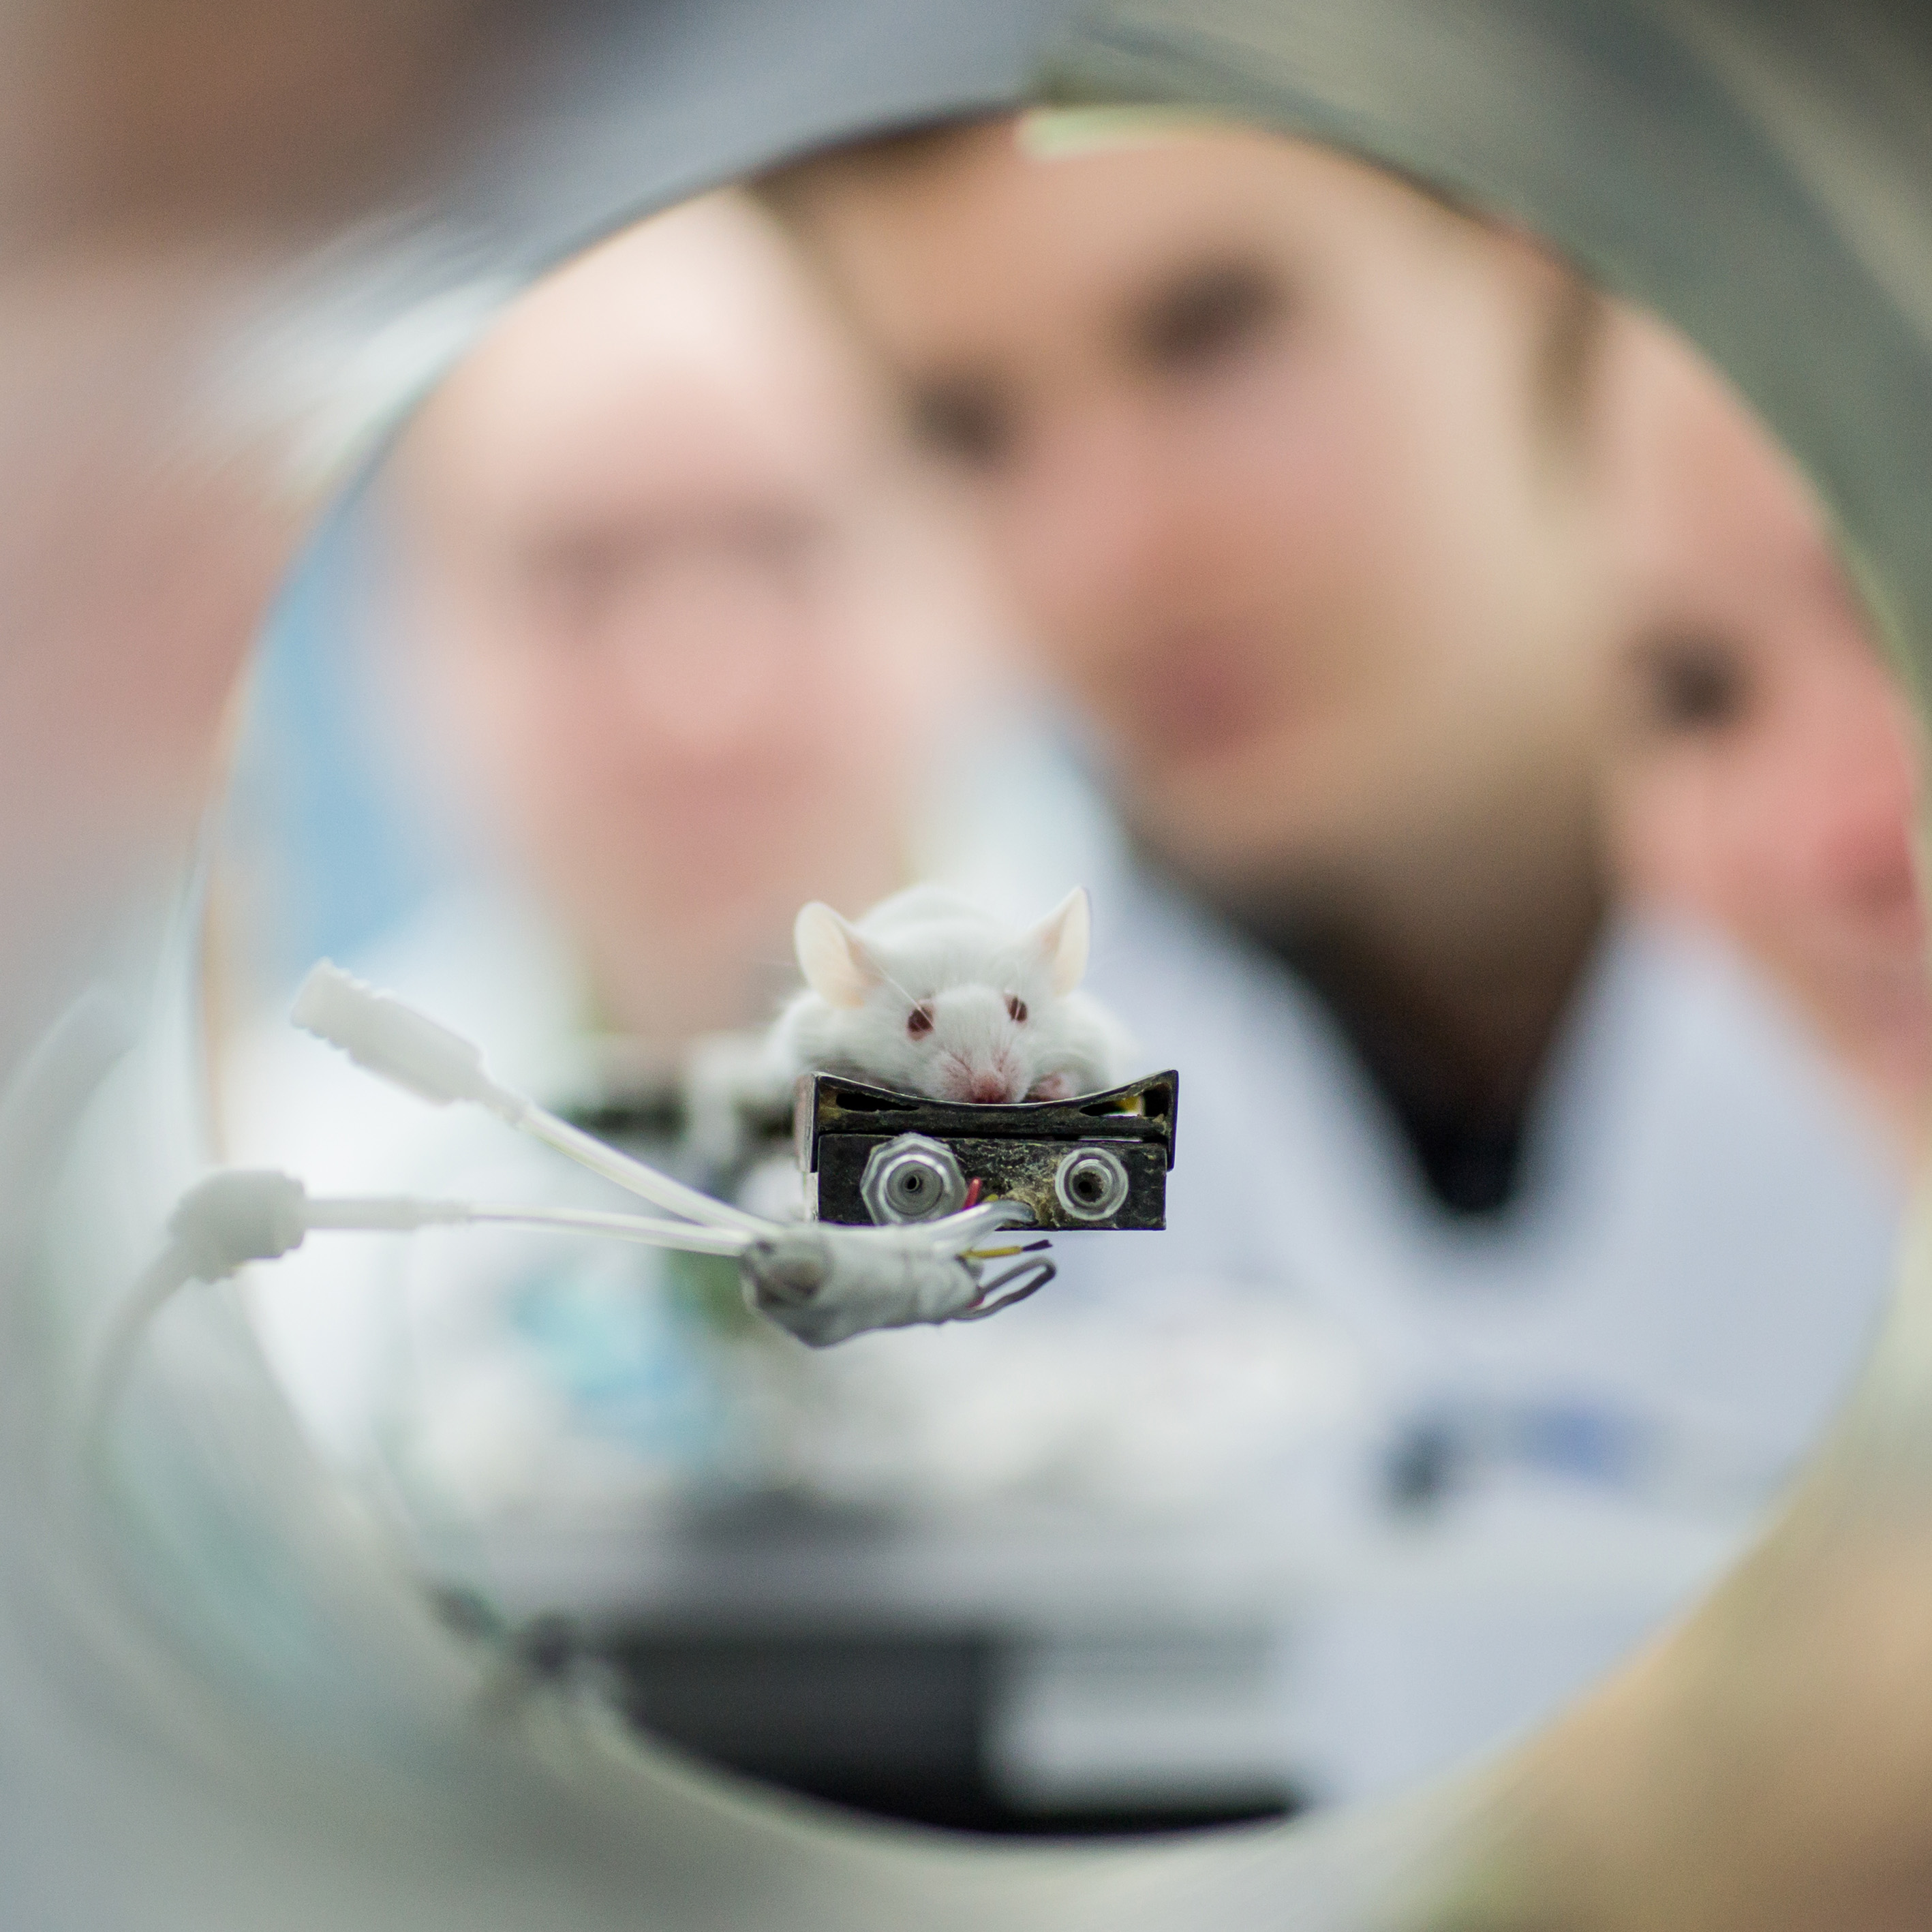 Training imaging with mice